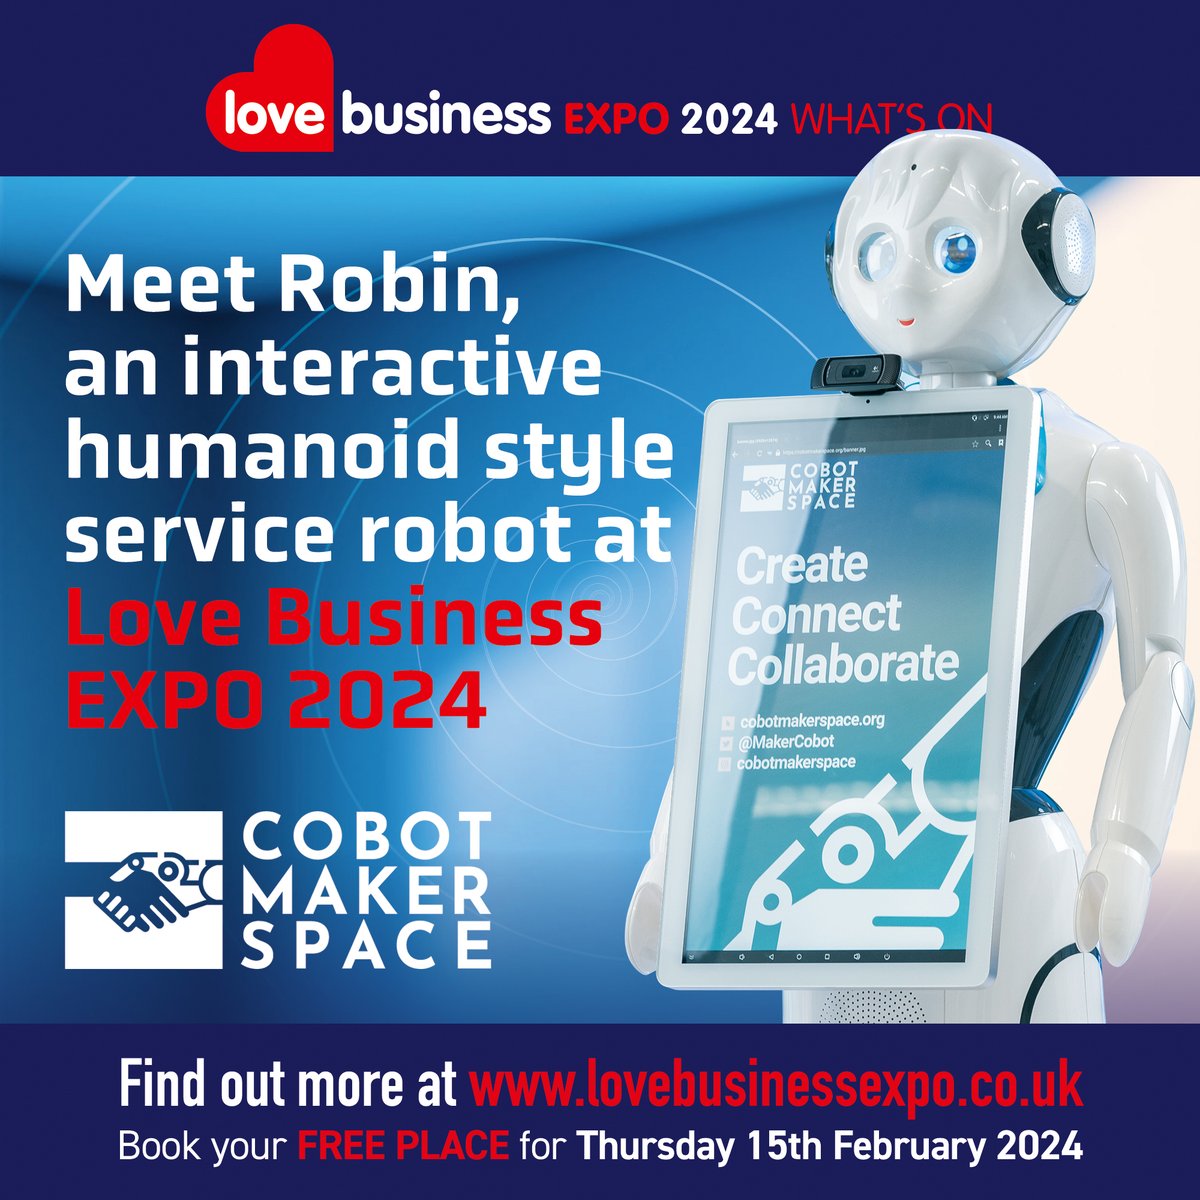 Robin the Robot will be making a appearance at Love Business EXPO 2024 on Thursday, February 15th at Holywell Park Conference Centre in Loughborough. Thanks @cobotmakerspace9 Book your FREE delegate ticket for Love Business EXPO 2024. lovebusinessexpo.co.uk #LoveBusinessEXPO